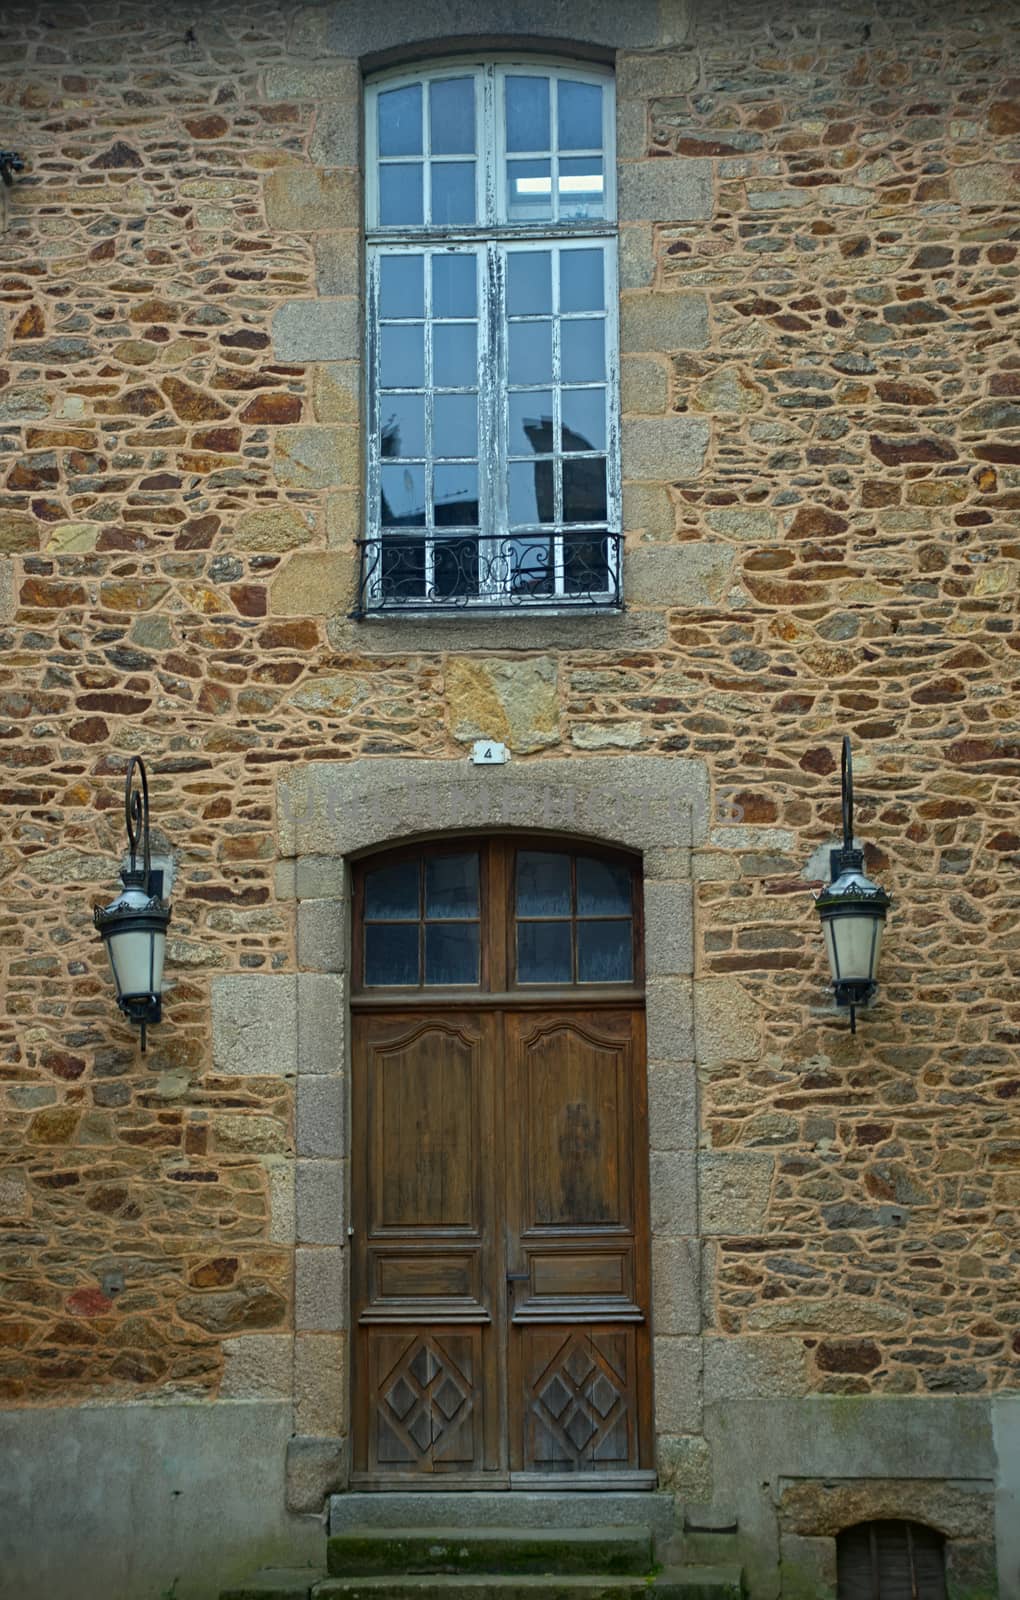 Wooden entrance door and window above on old stone house